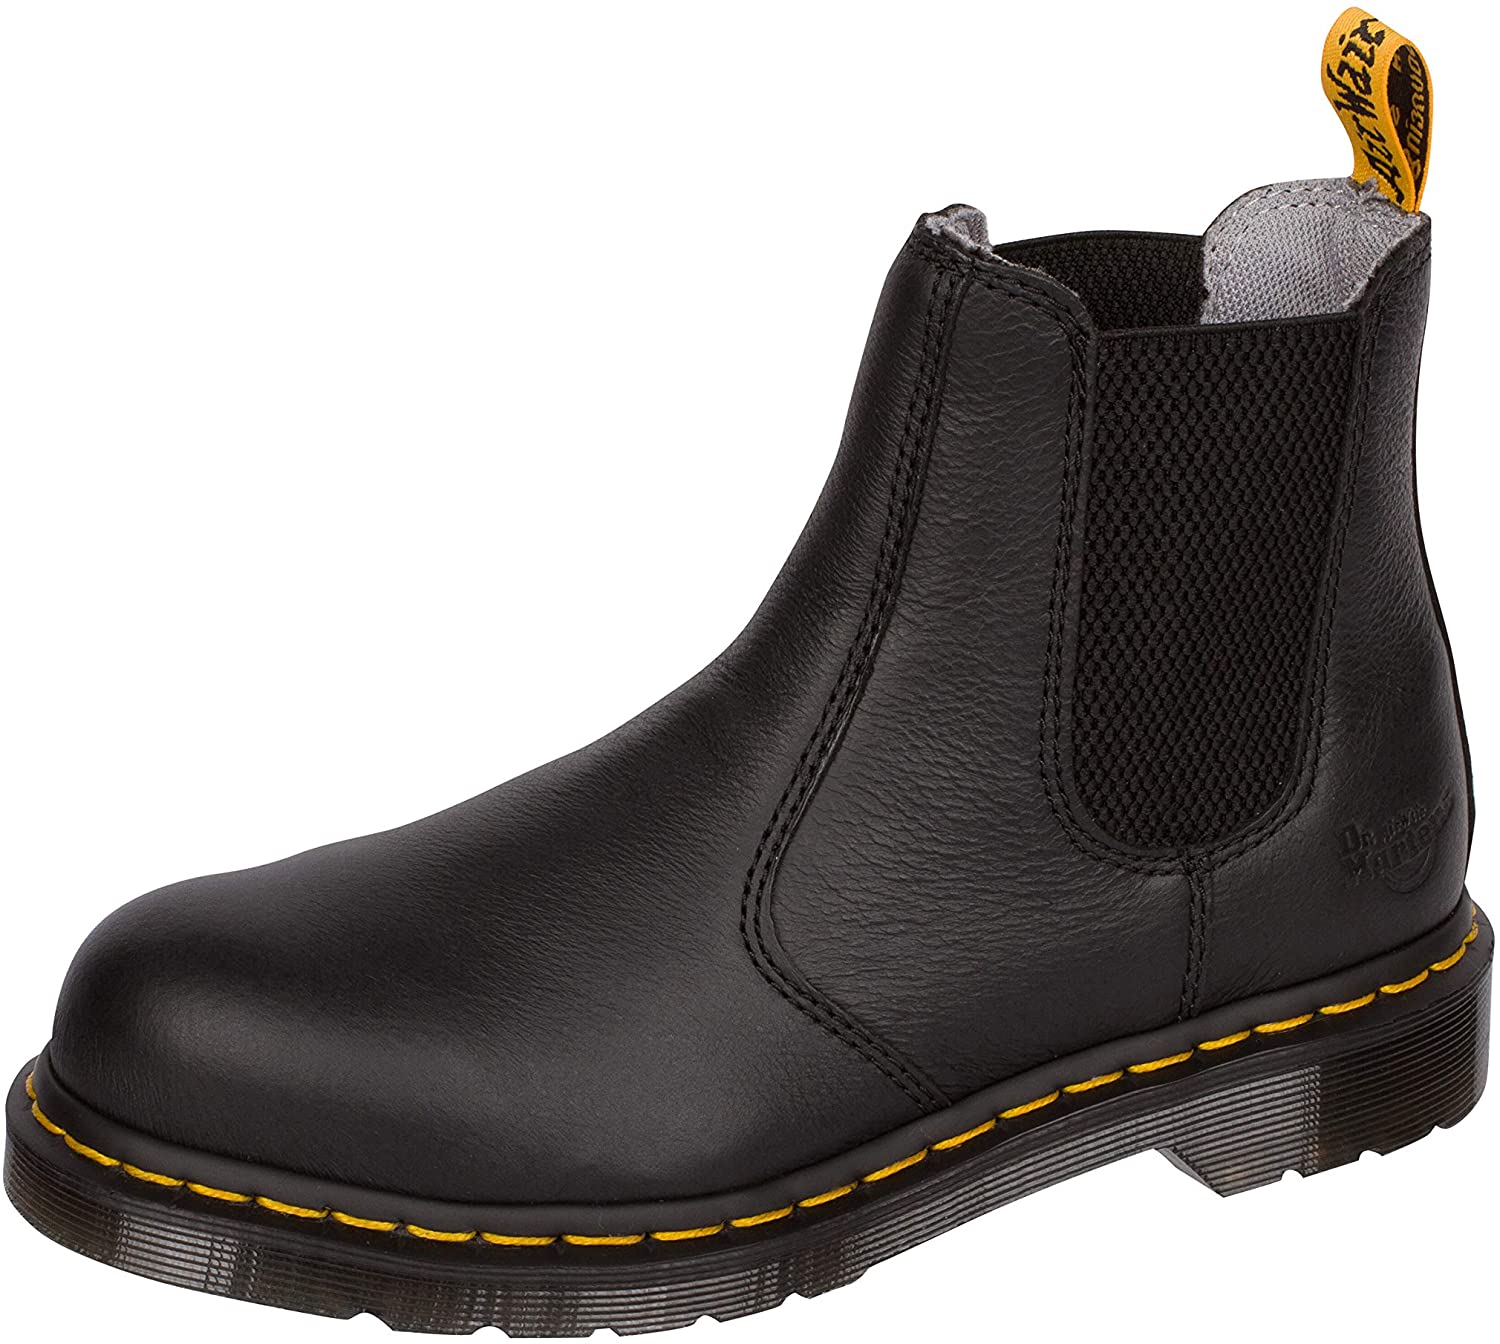 dr-martens-womens-arbor-steel-toe-light-industry-boots-dr-martens-boots